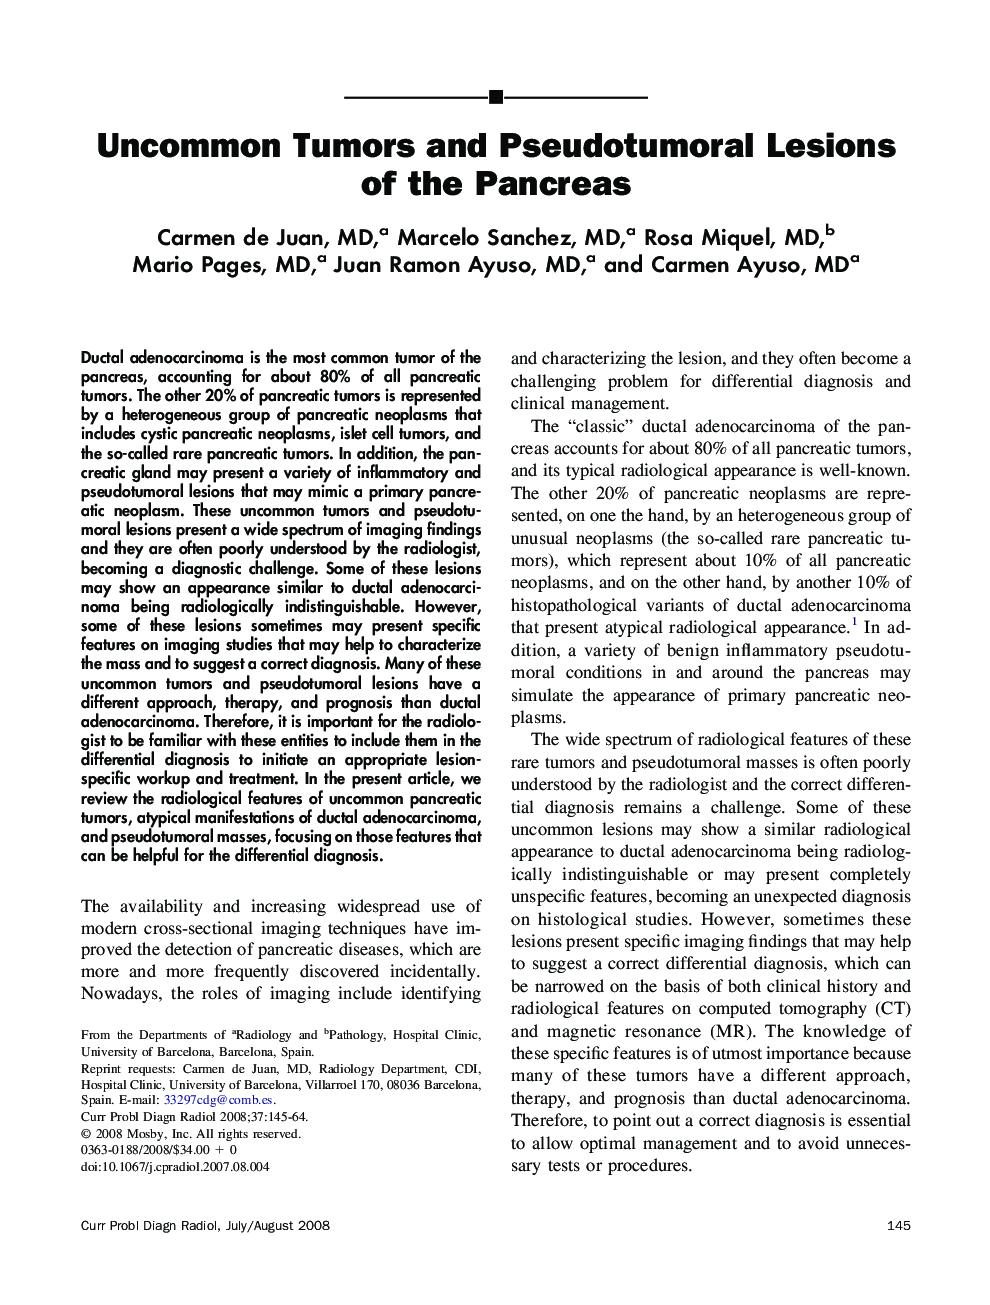 Uncommon Tumors and Pseudotumoral Lesions of the Pancreas